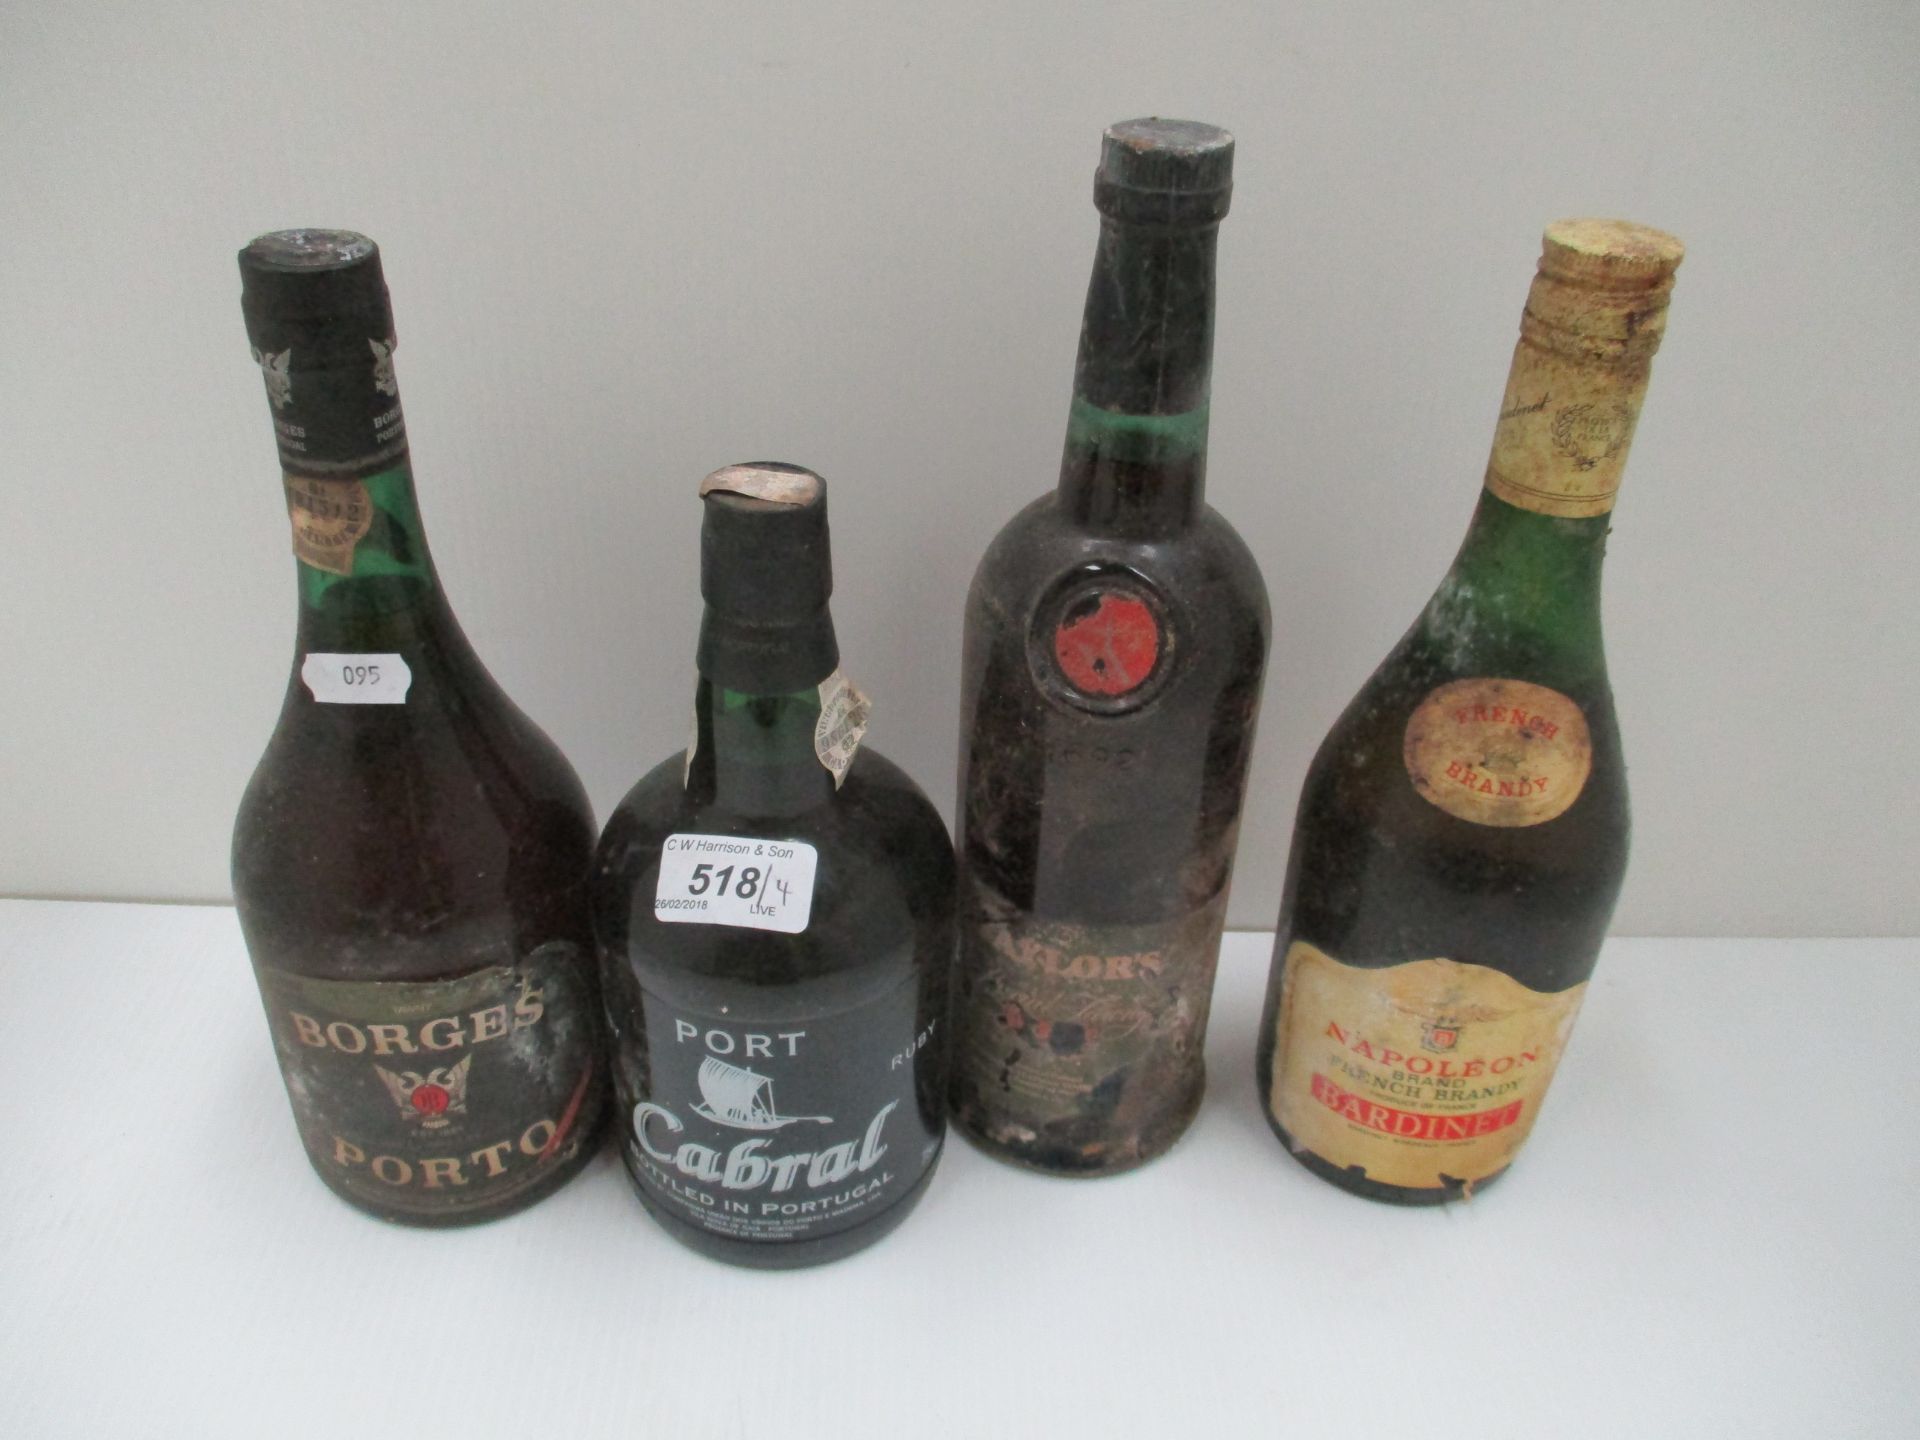 A 70cl bottle of Taylors Special Tawny Port (label damaged), a 75cl bottle of Cabral ruby port,